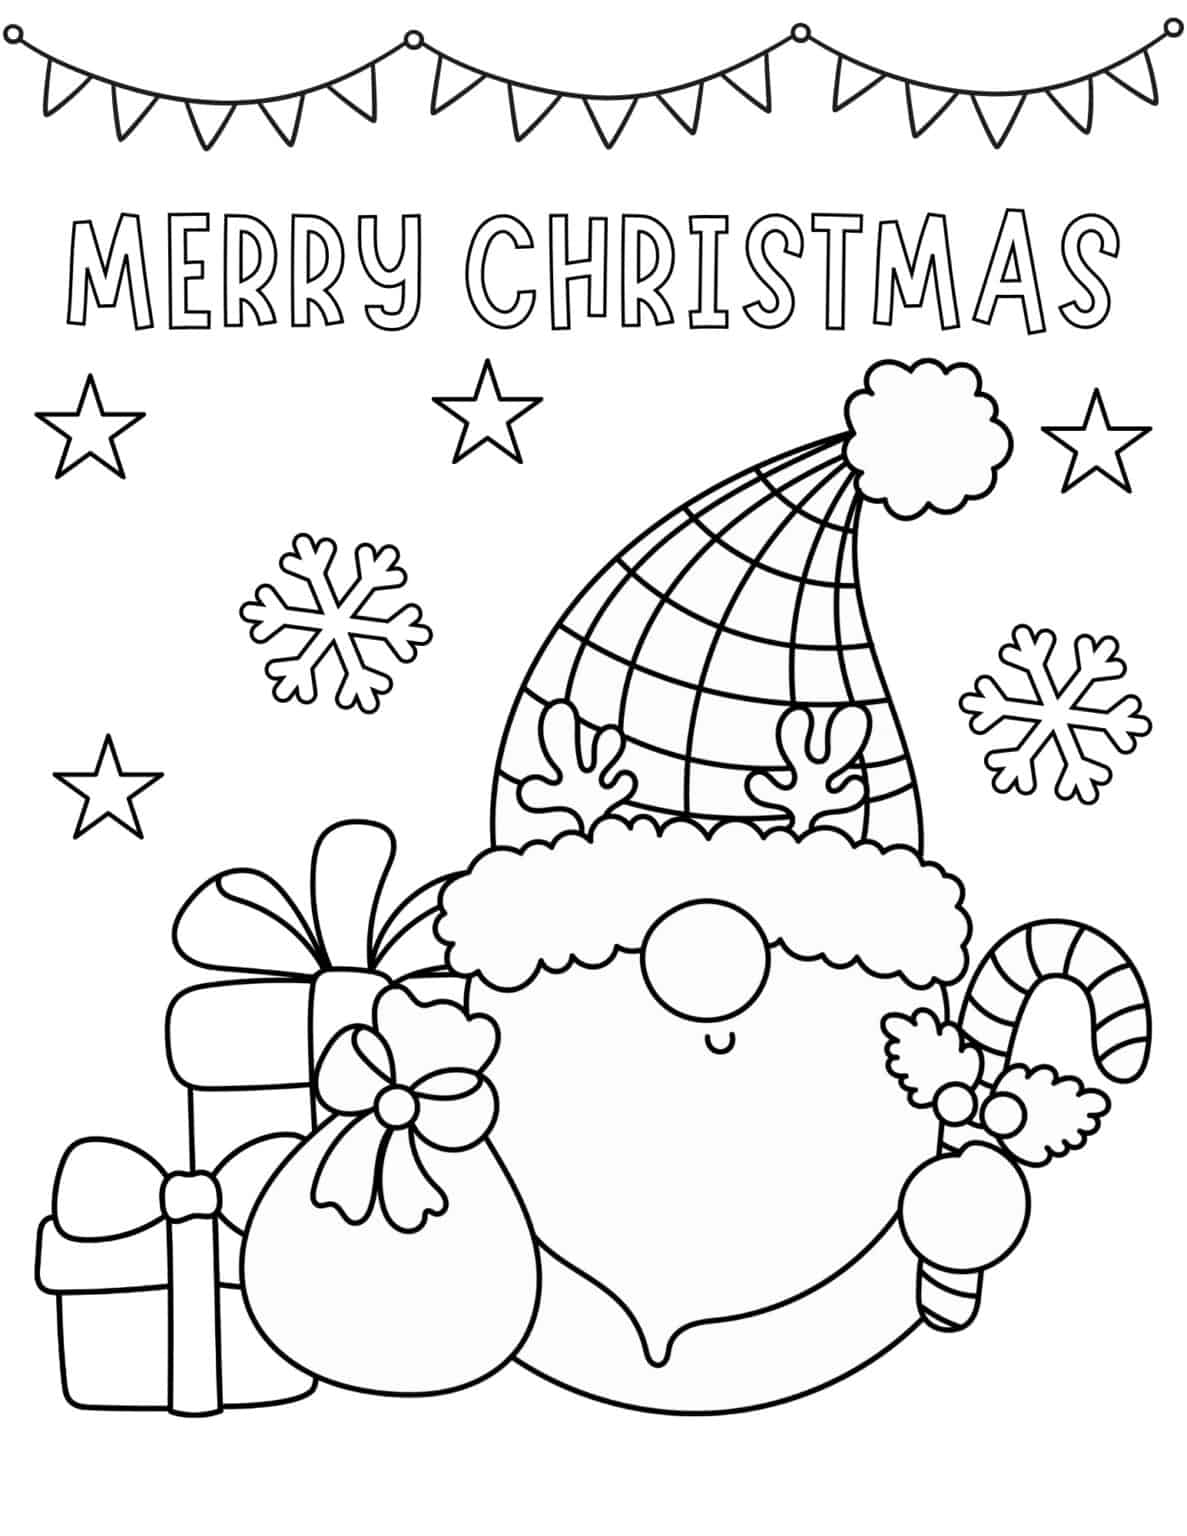 150 Free Christmas Coloring Pages for Kids - Prudent Penny Pincher